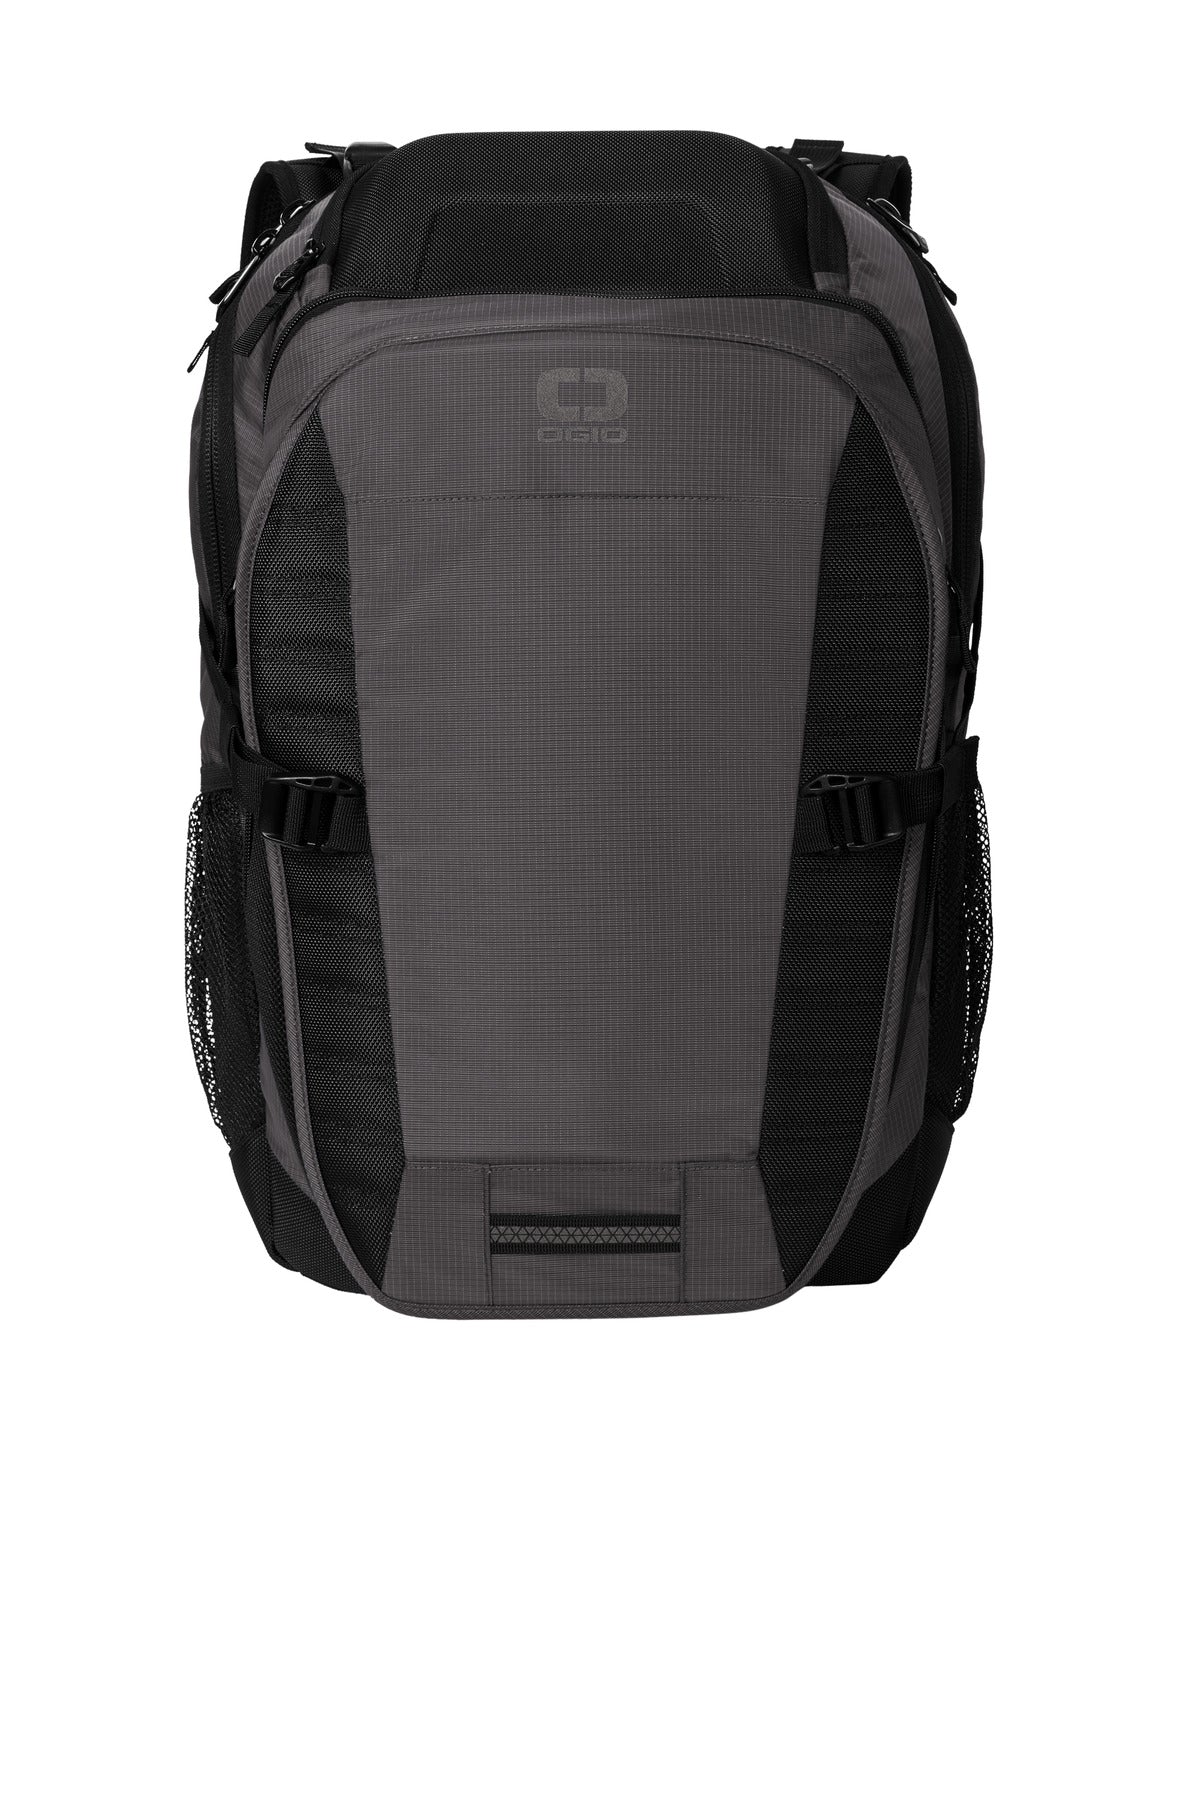 OGIO® Motion X-Over Pack 91020